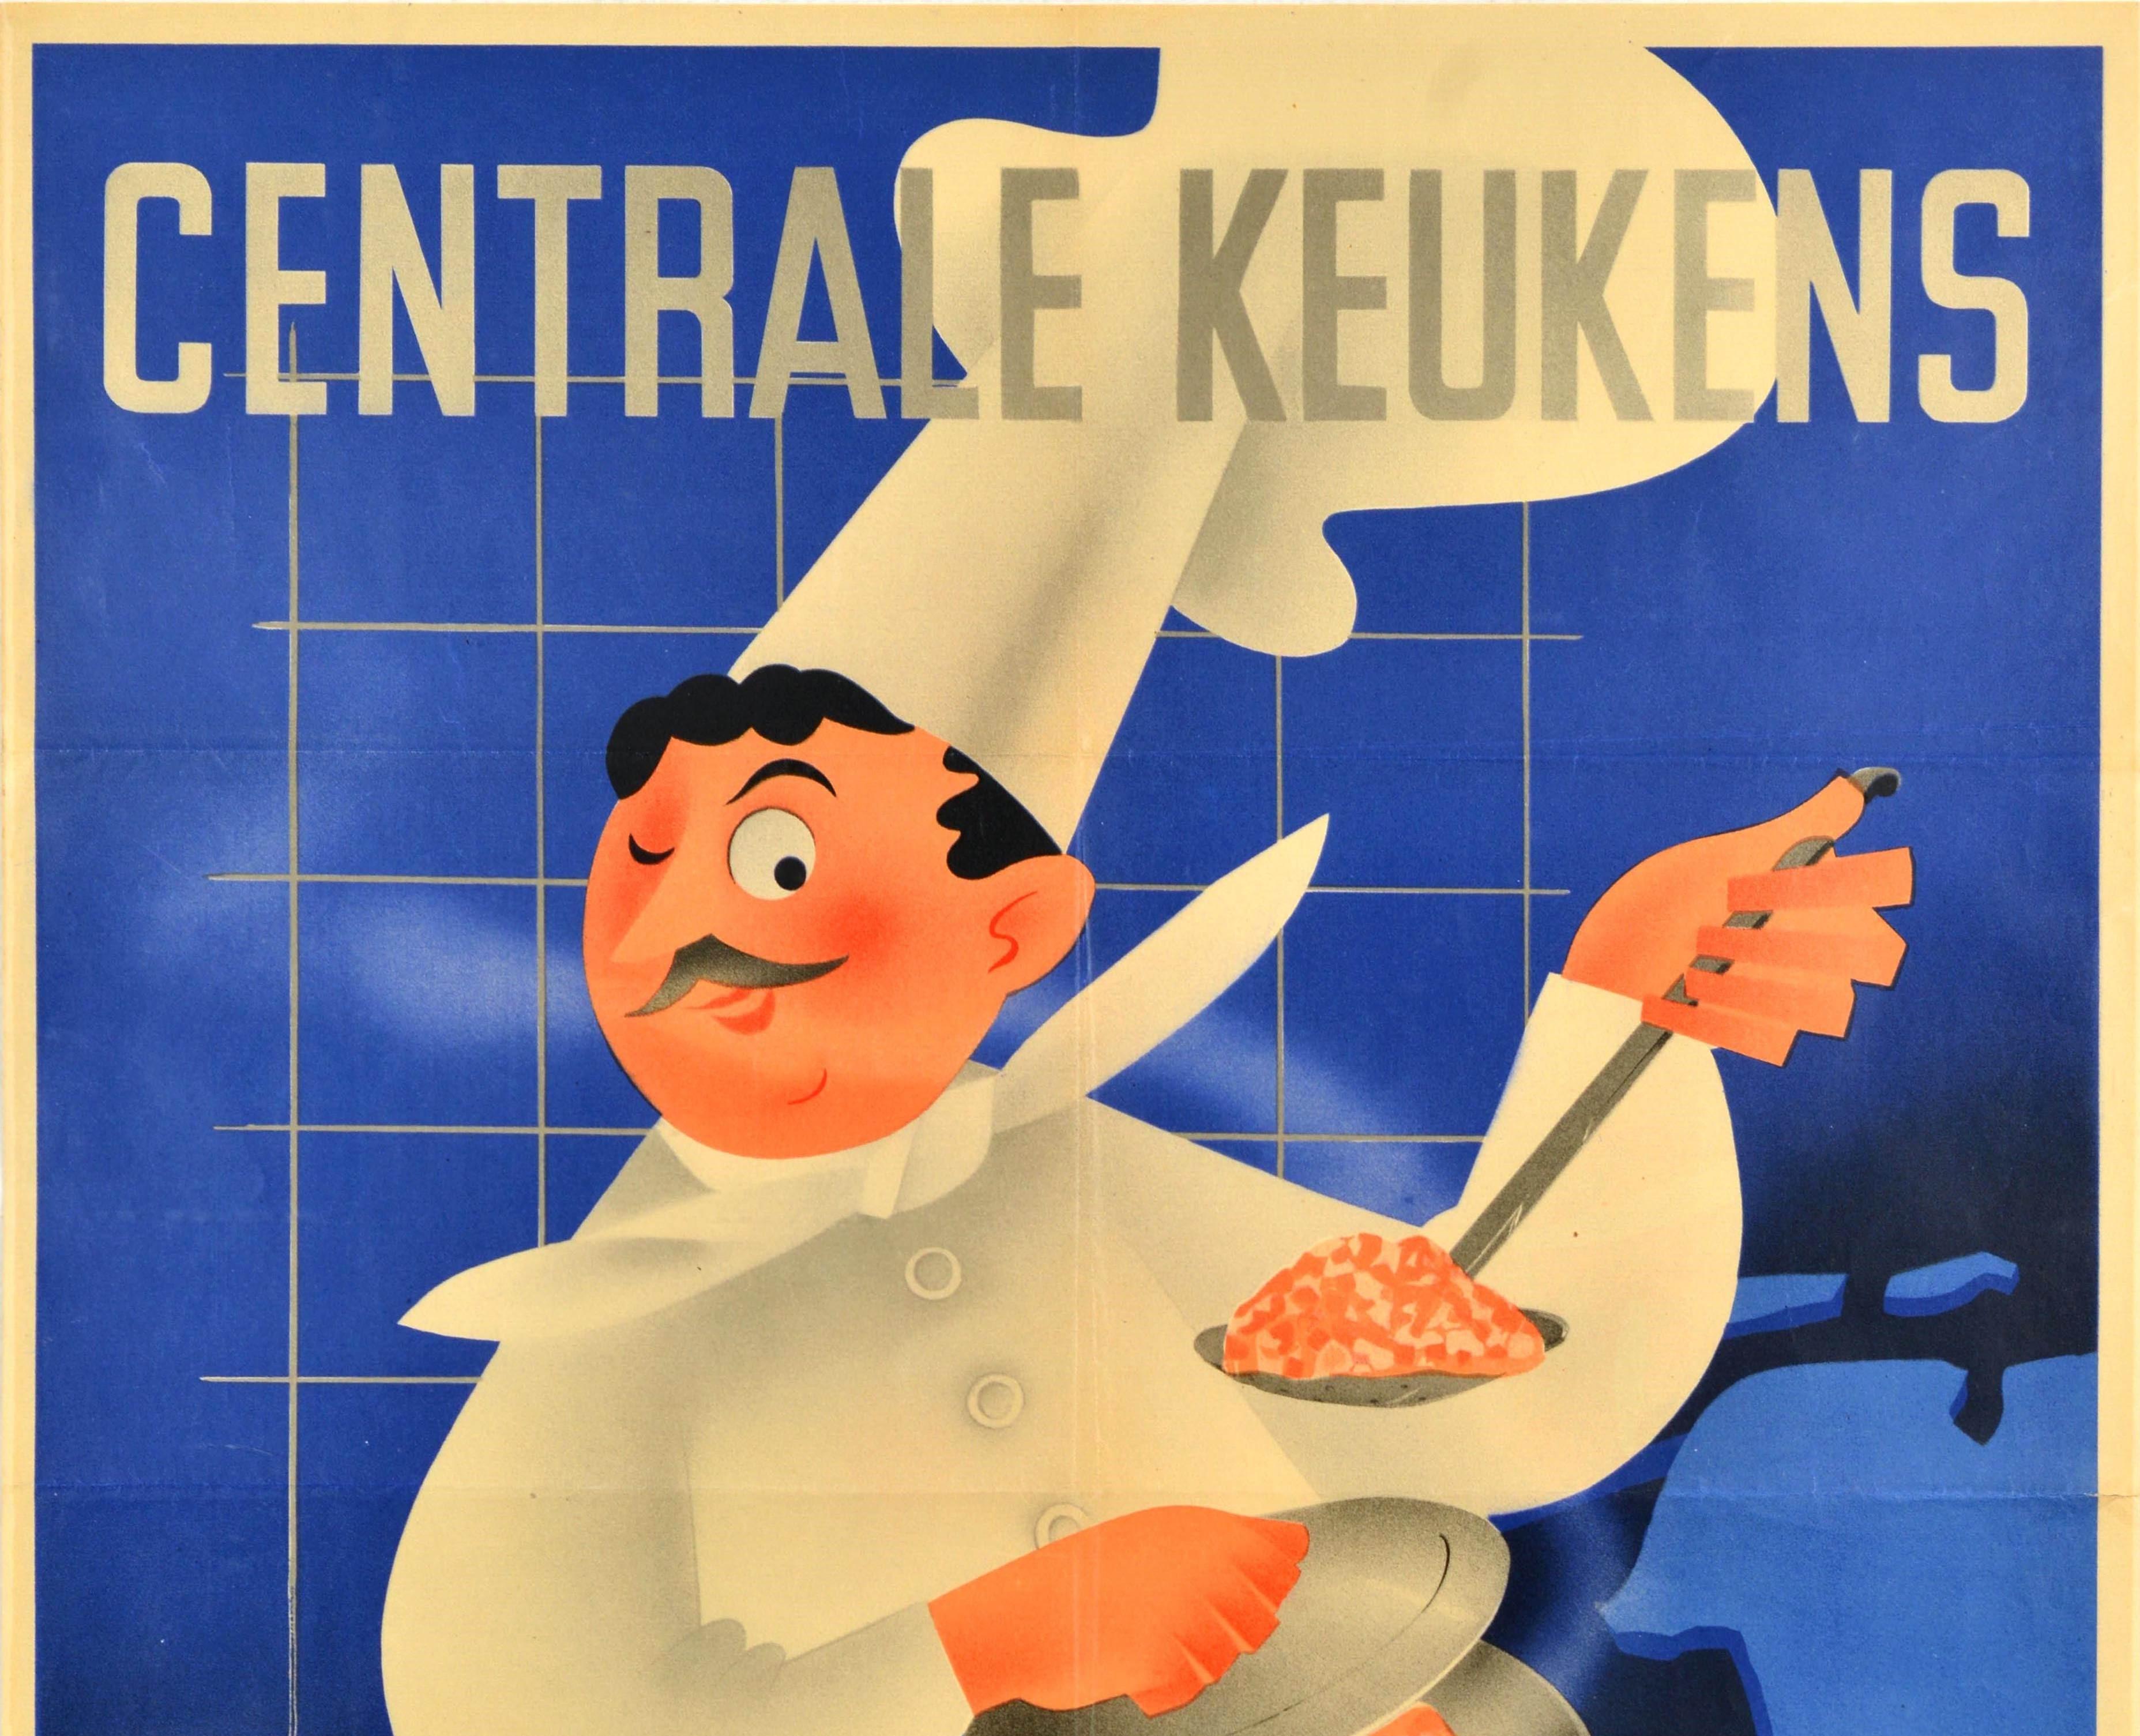 Original vintage World War Two food propaganda poster - Central Kitchens A nutritious meal for little money / Centrale Keukens Voor weinig geld een voedzaam maal - featuring a fun illustration of a smiling chef winking at the viewer and holding a